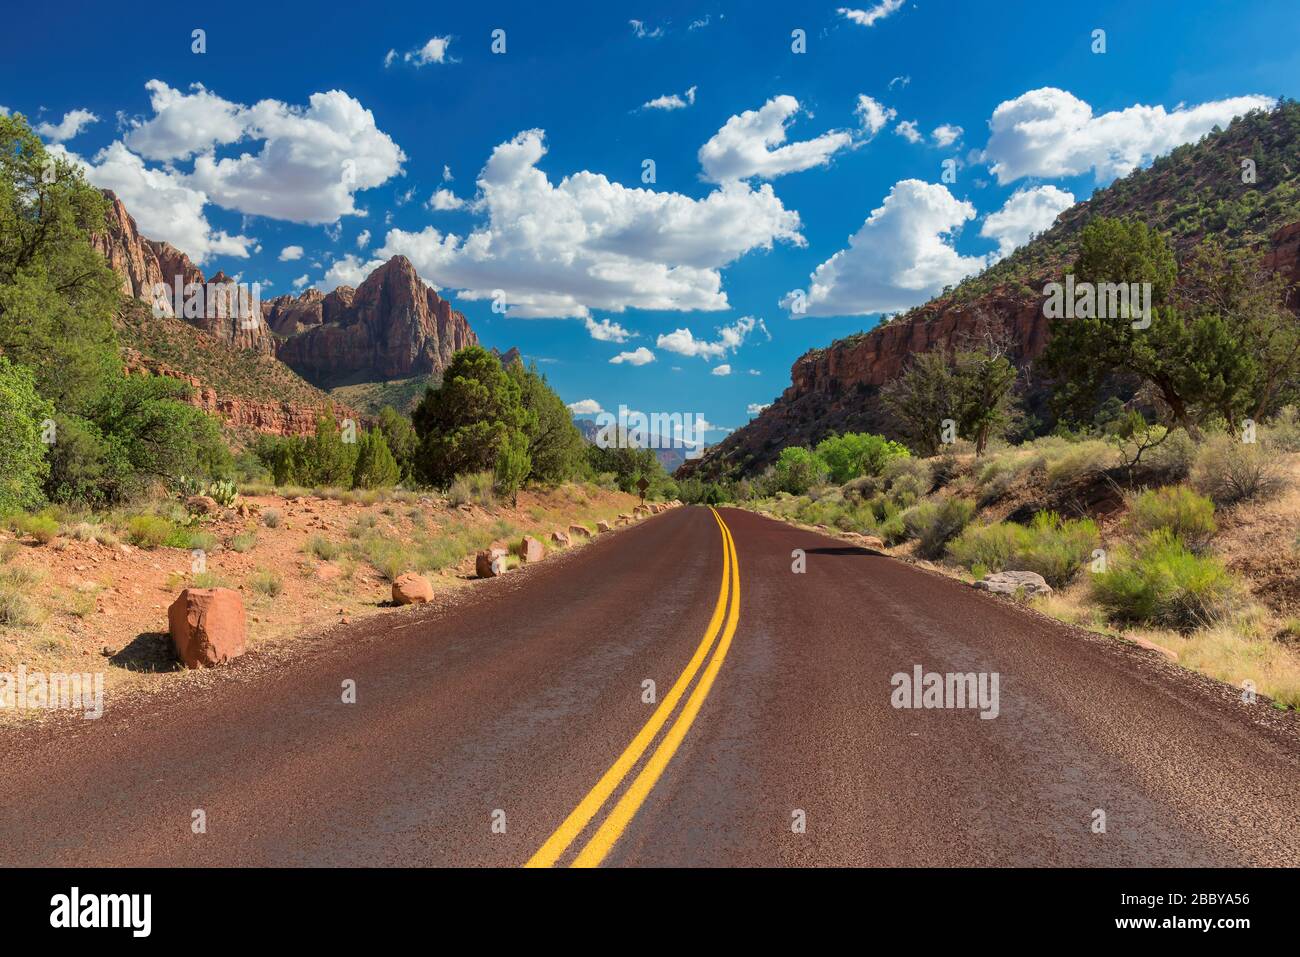 Road trip to Zion national Park, Utah Stock Photo